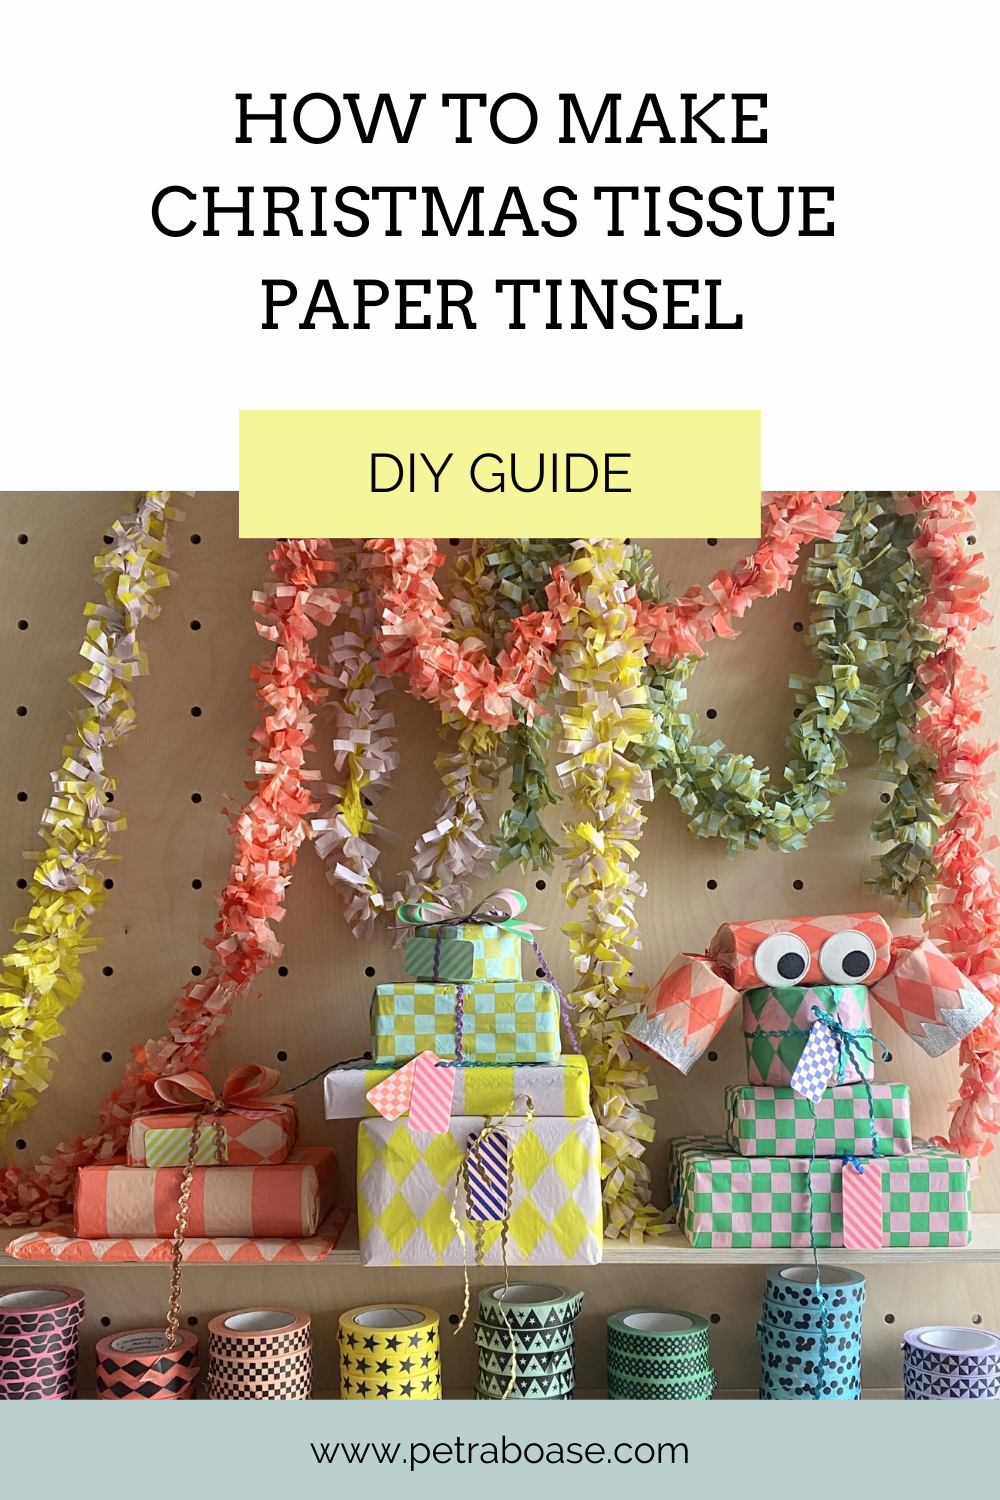 How To Make Your Own Tissue Paper Christmas Tinsel - DIY Guide